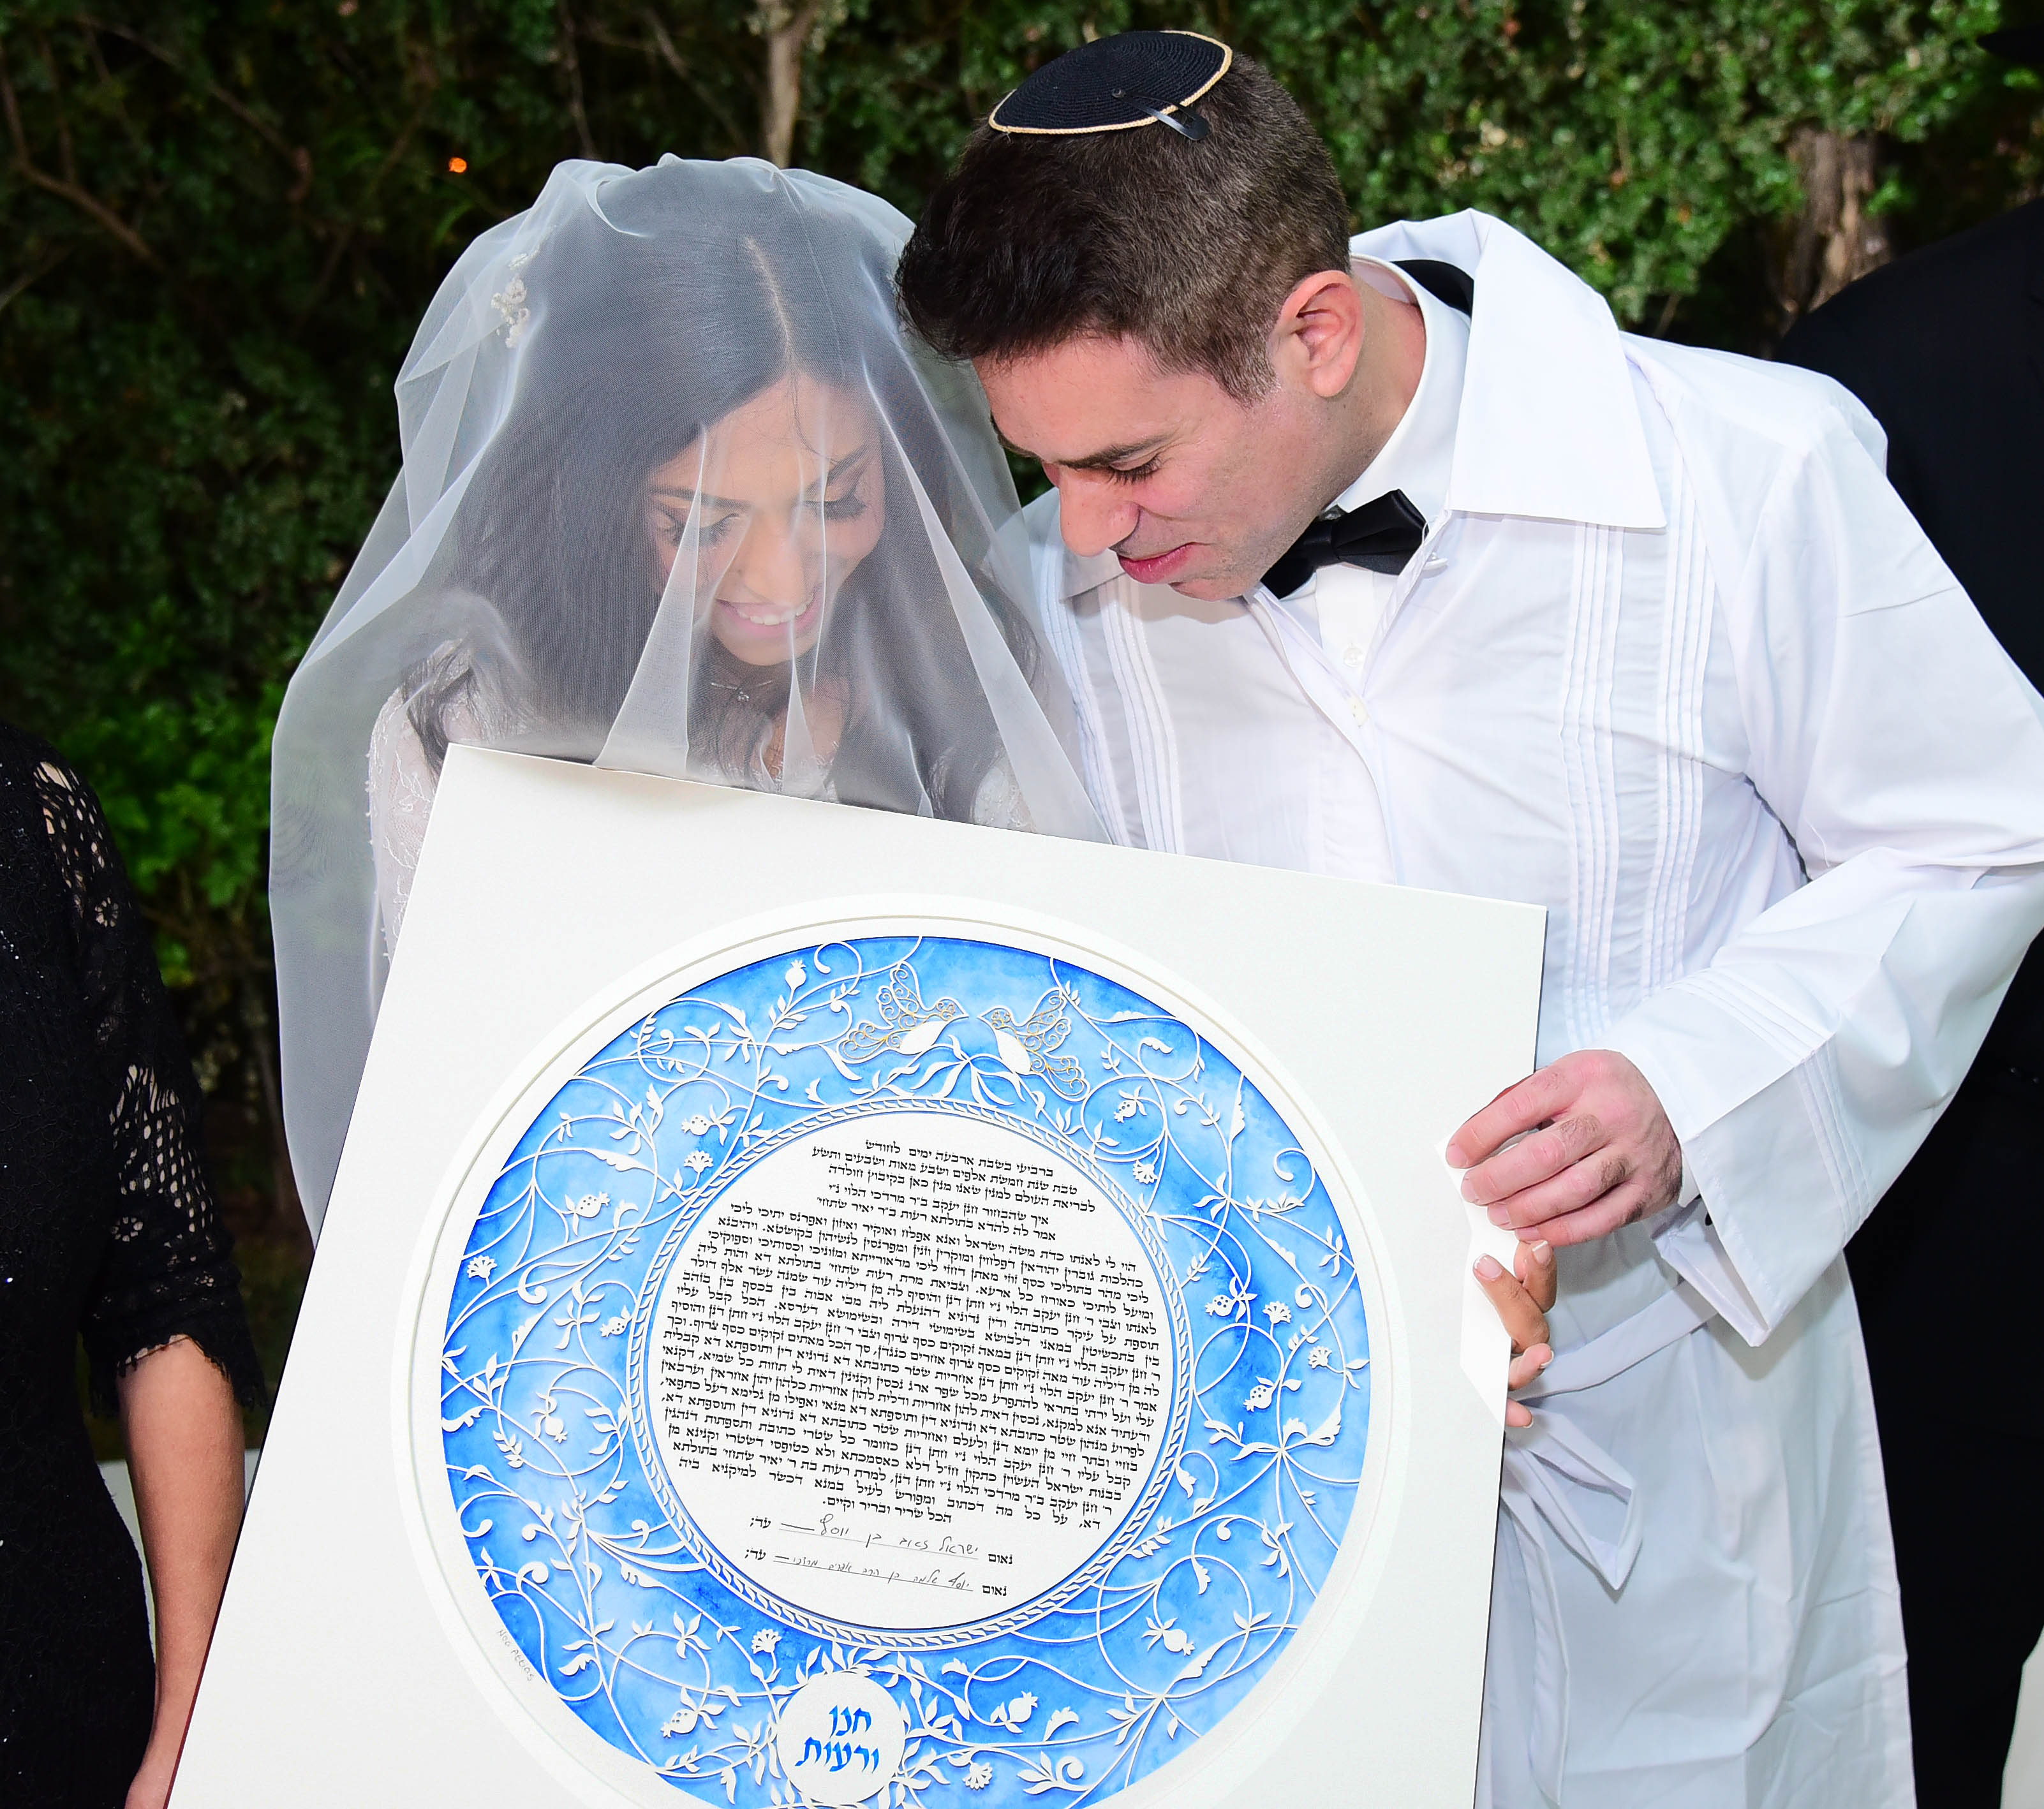 An illustration of a couple discussing potential issues during the Ketubah signing process.